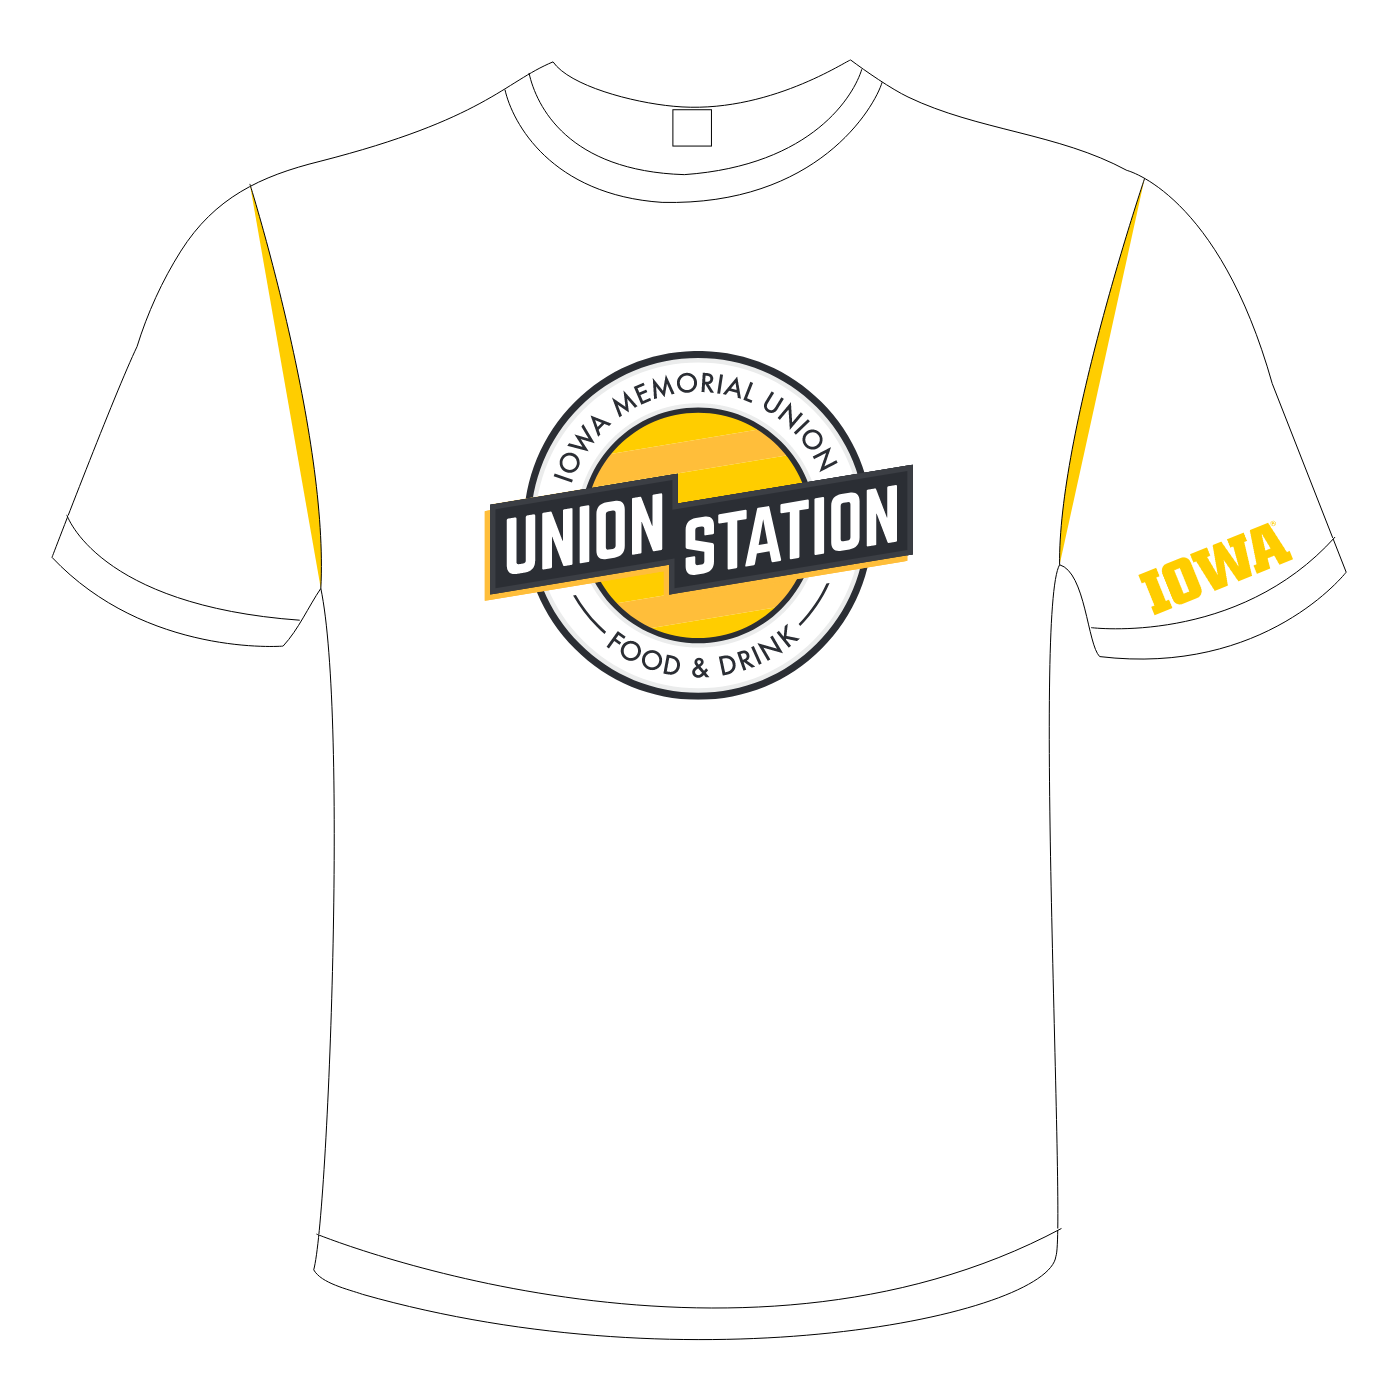 Union Station graphic on front of tee, block IOWA on sleeve